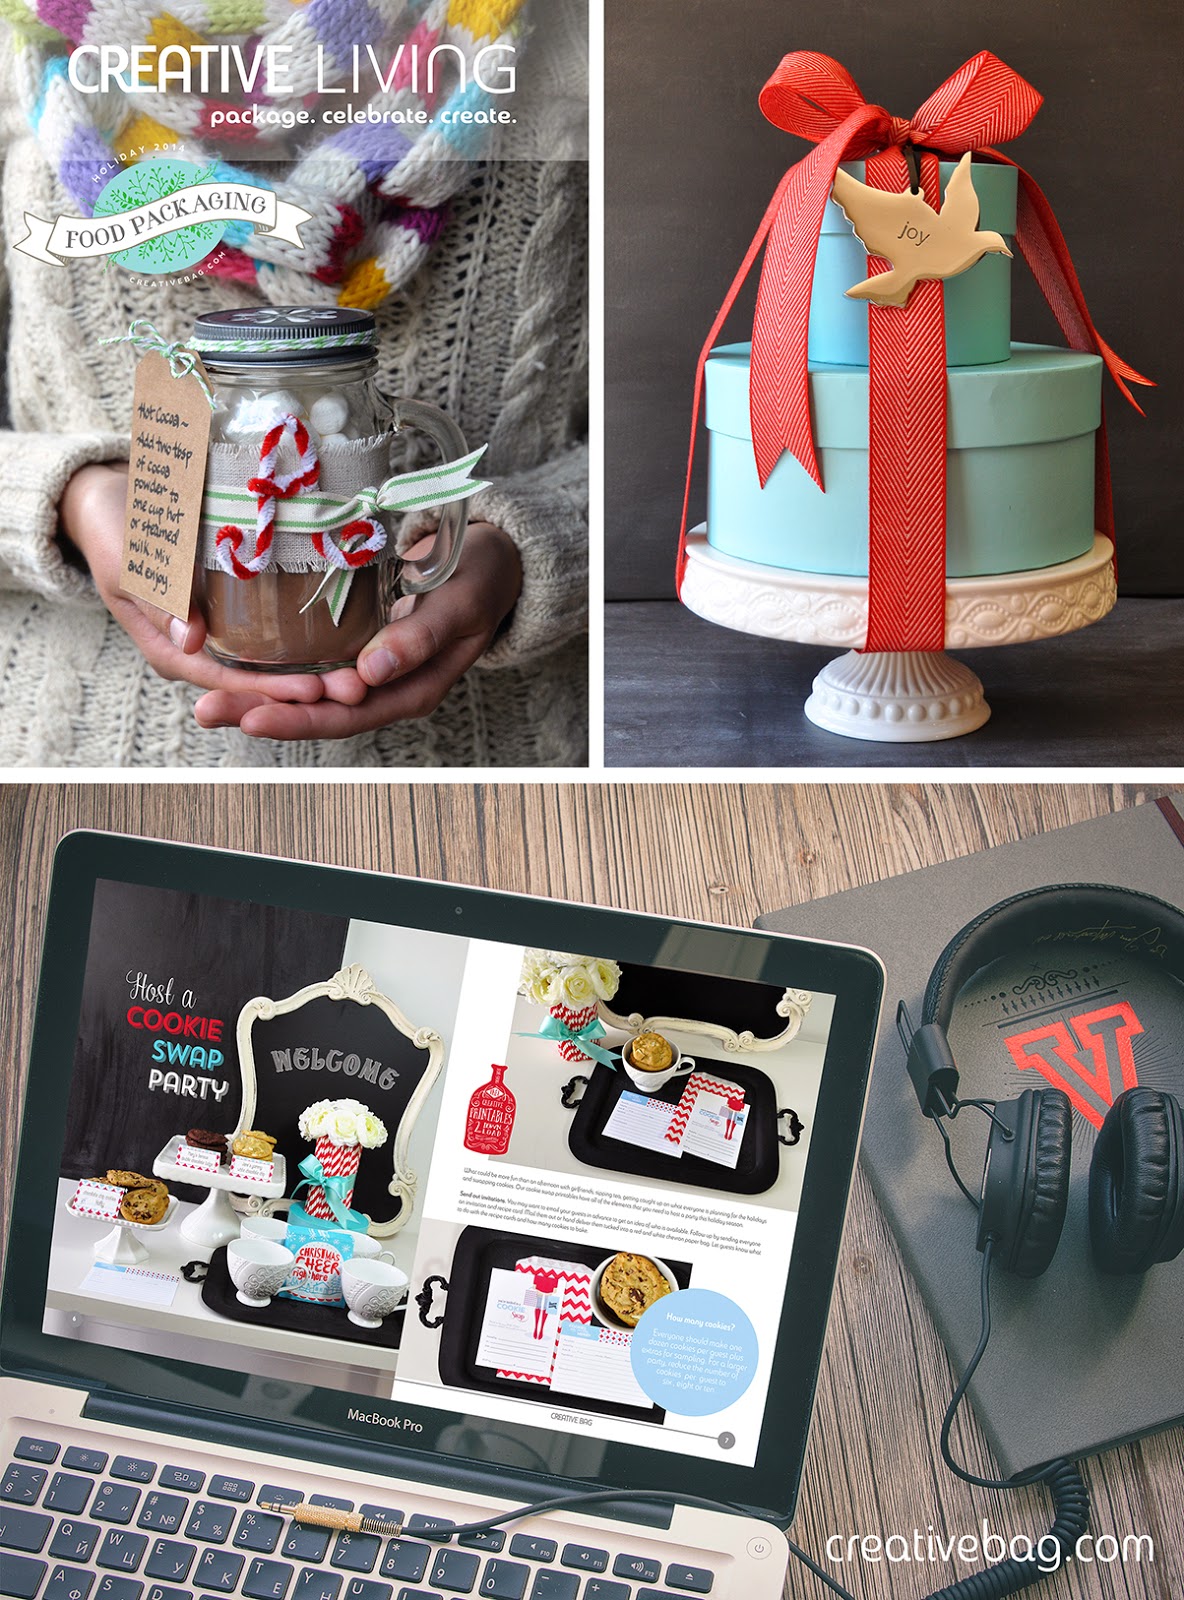 Creative Living online magazine - Holiday Food Packaging 2014 | Creative Bag